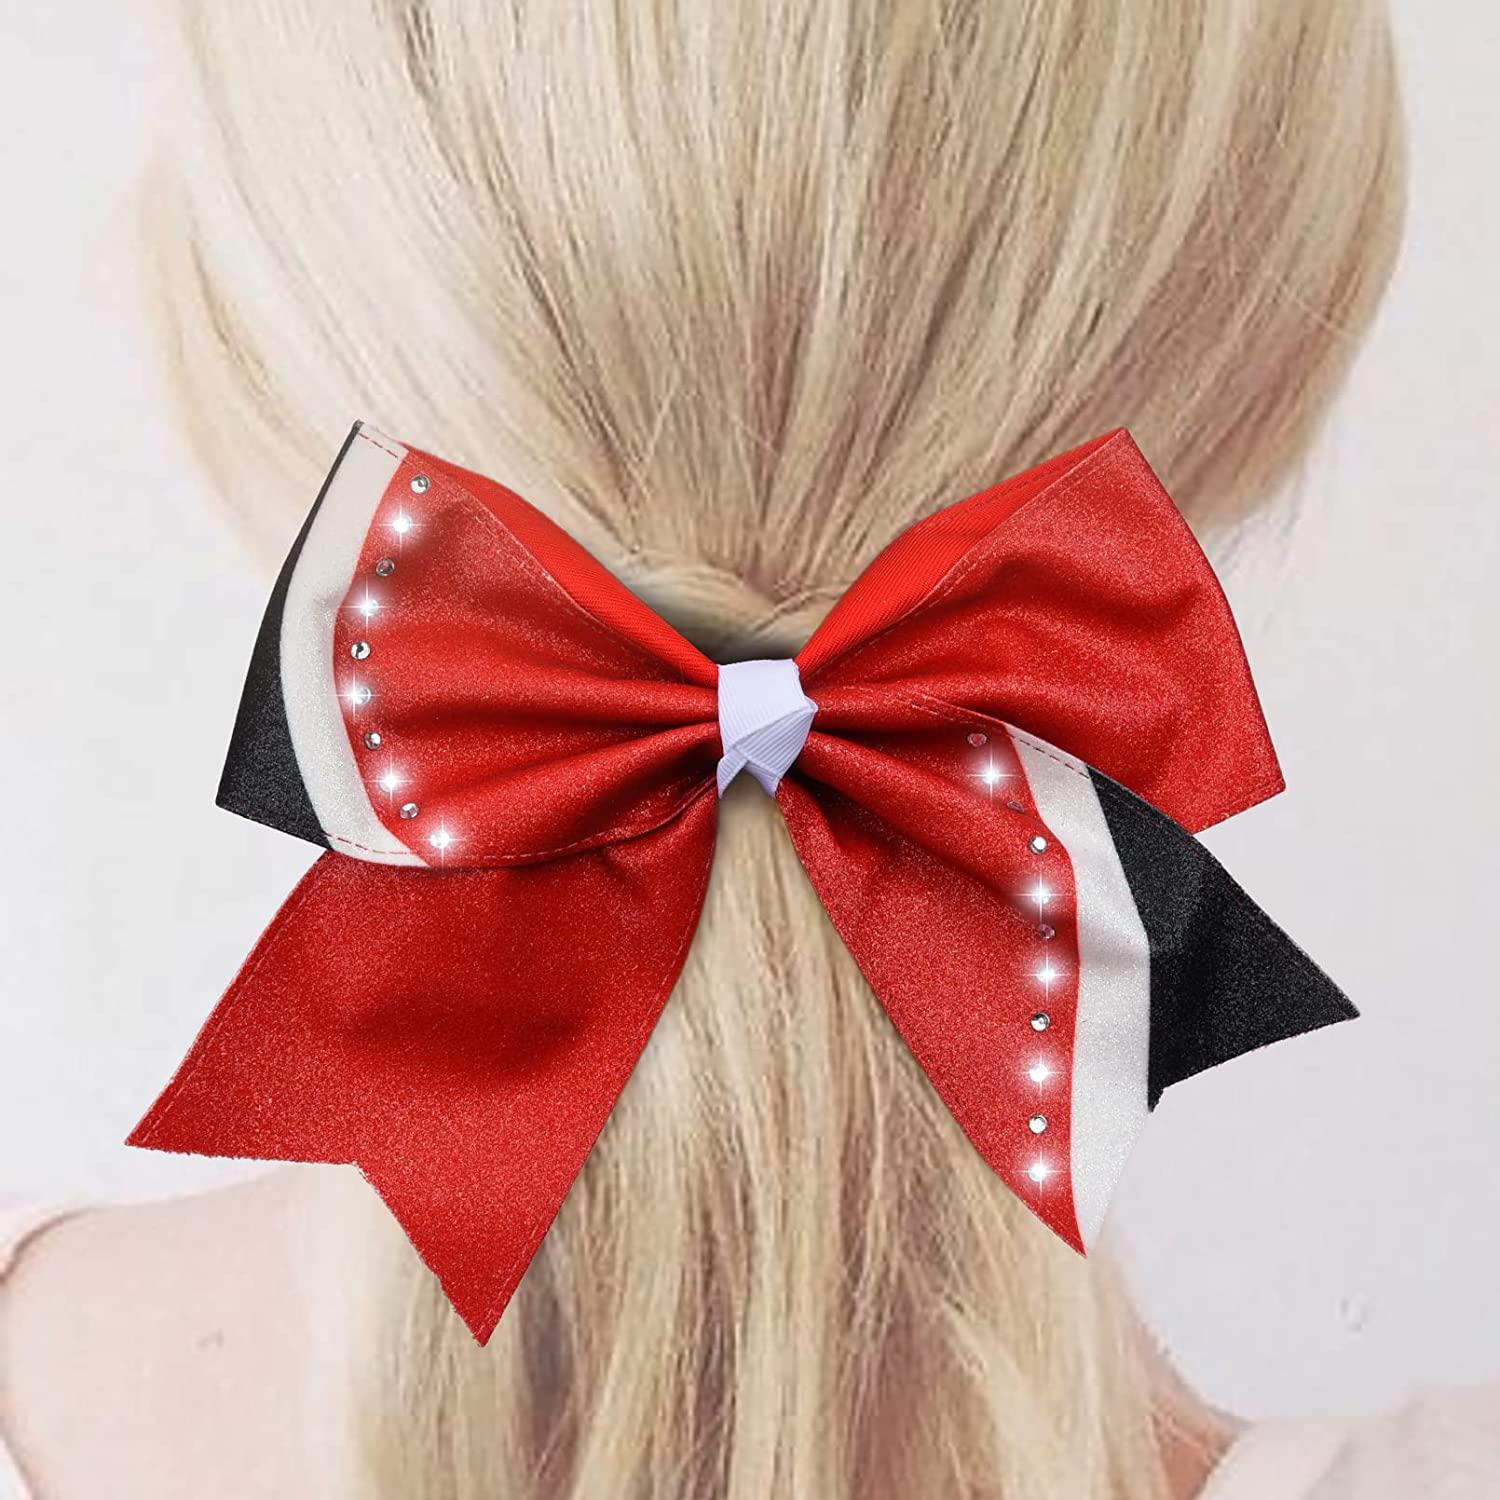 8 Glitter Red Cheer Bows - CEELGON Large Shiny Red Rhinestone